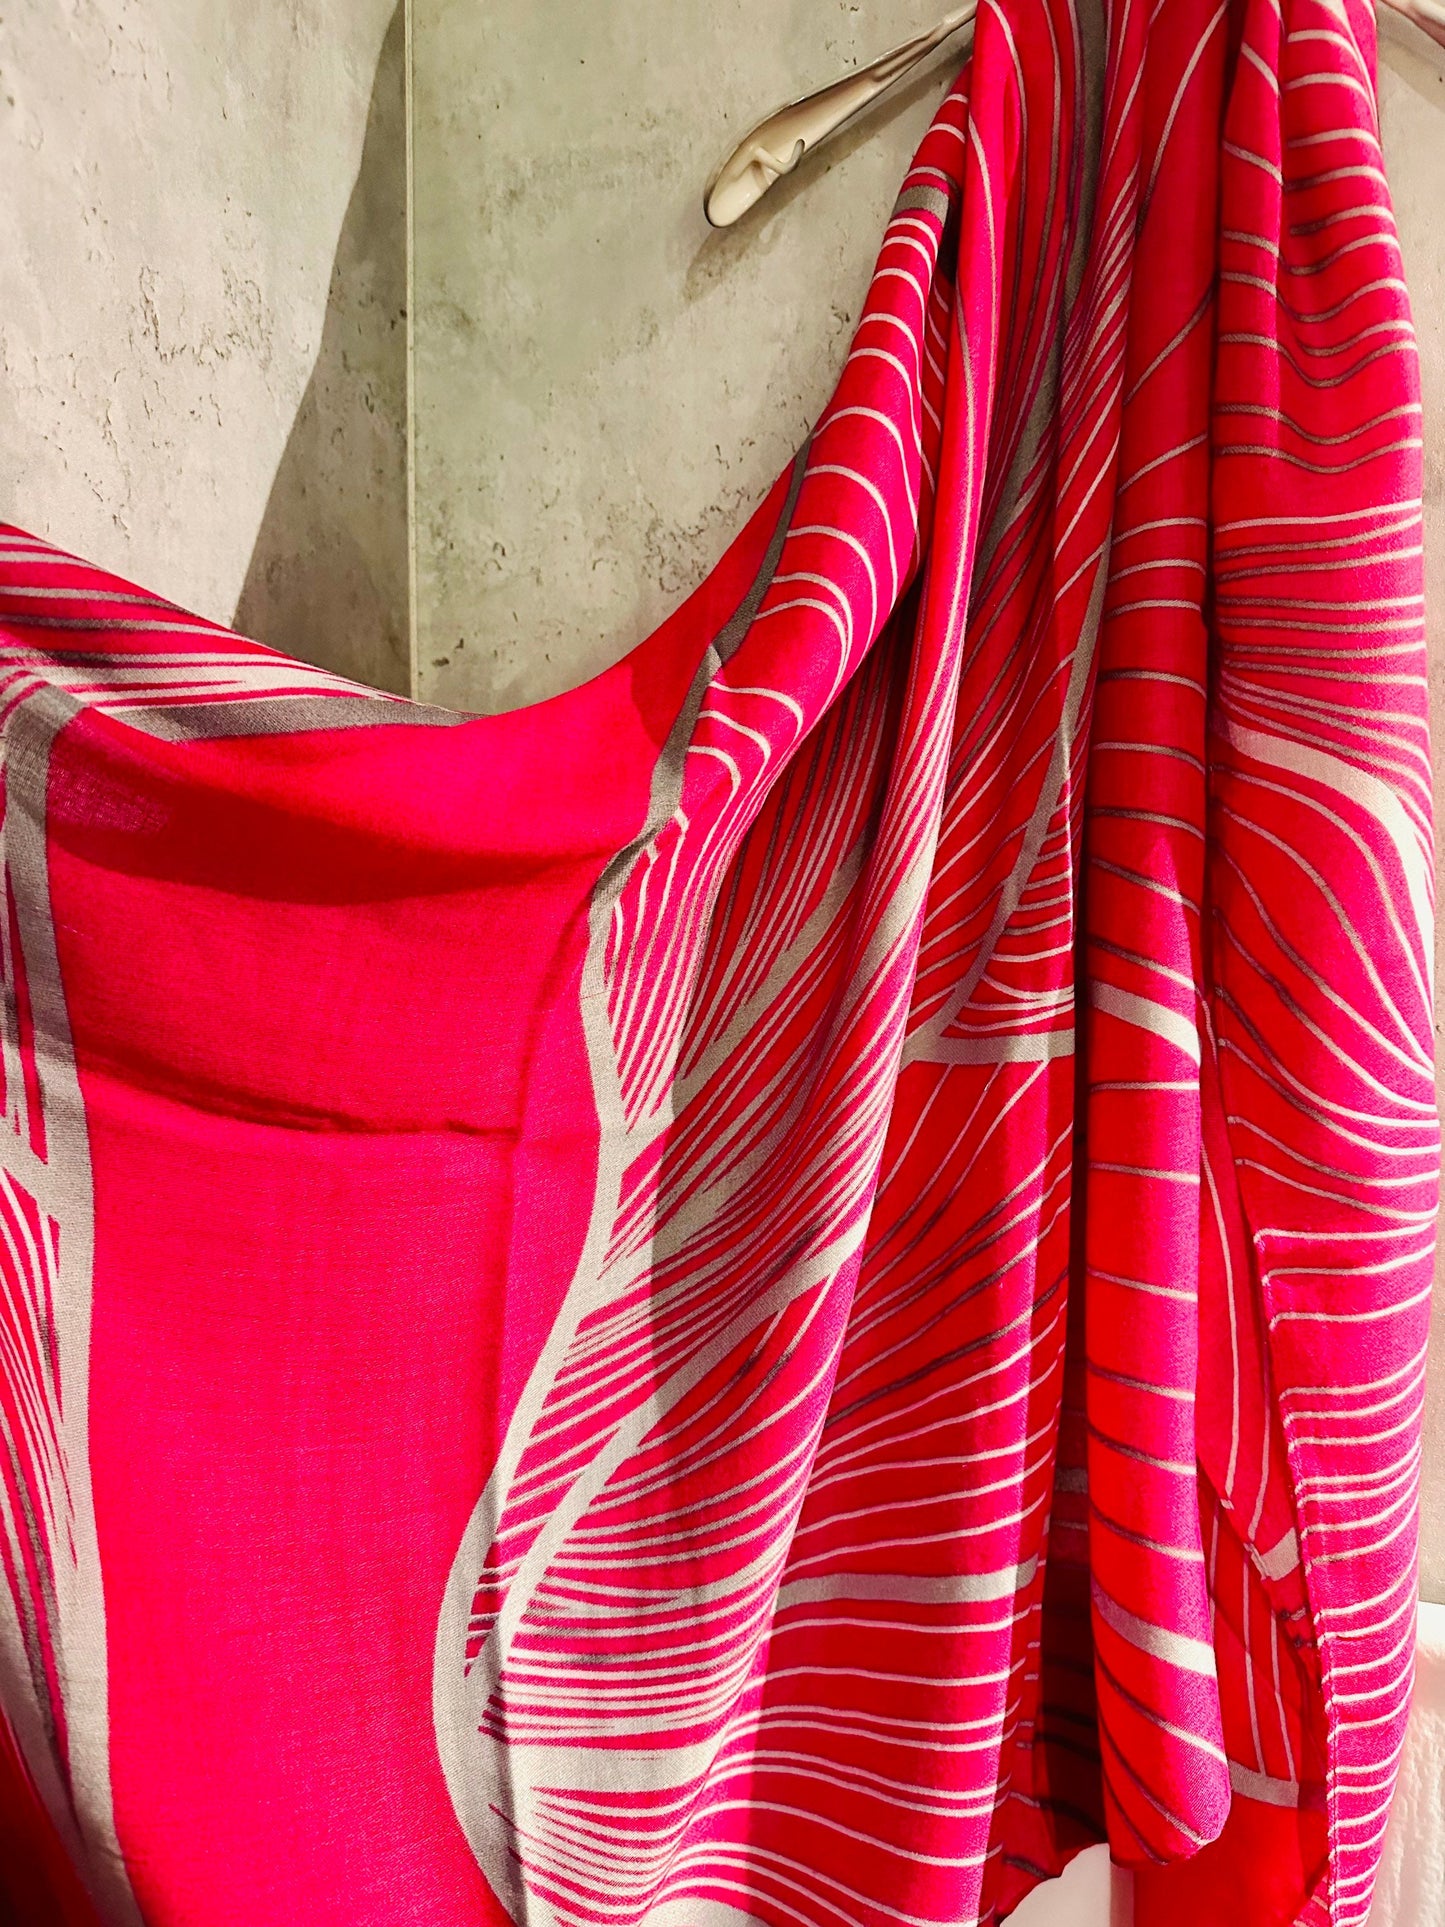 Pink Organic Cotton Scarf with Leaf Vein Pattern – An Eco-Friendly Gift for Mom, Perfect for Birthday and Christmas, from a UK Seller